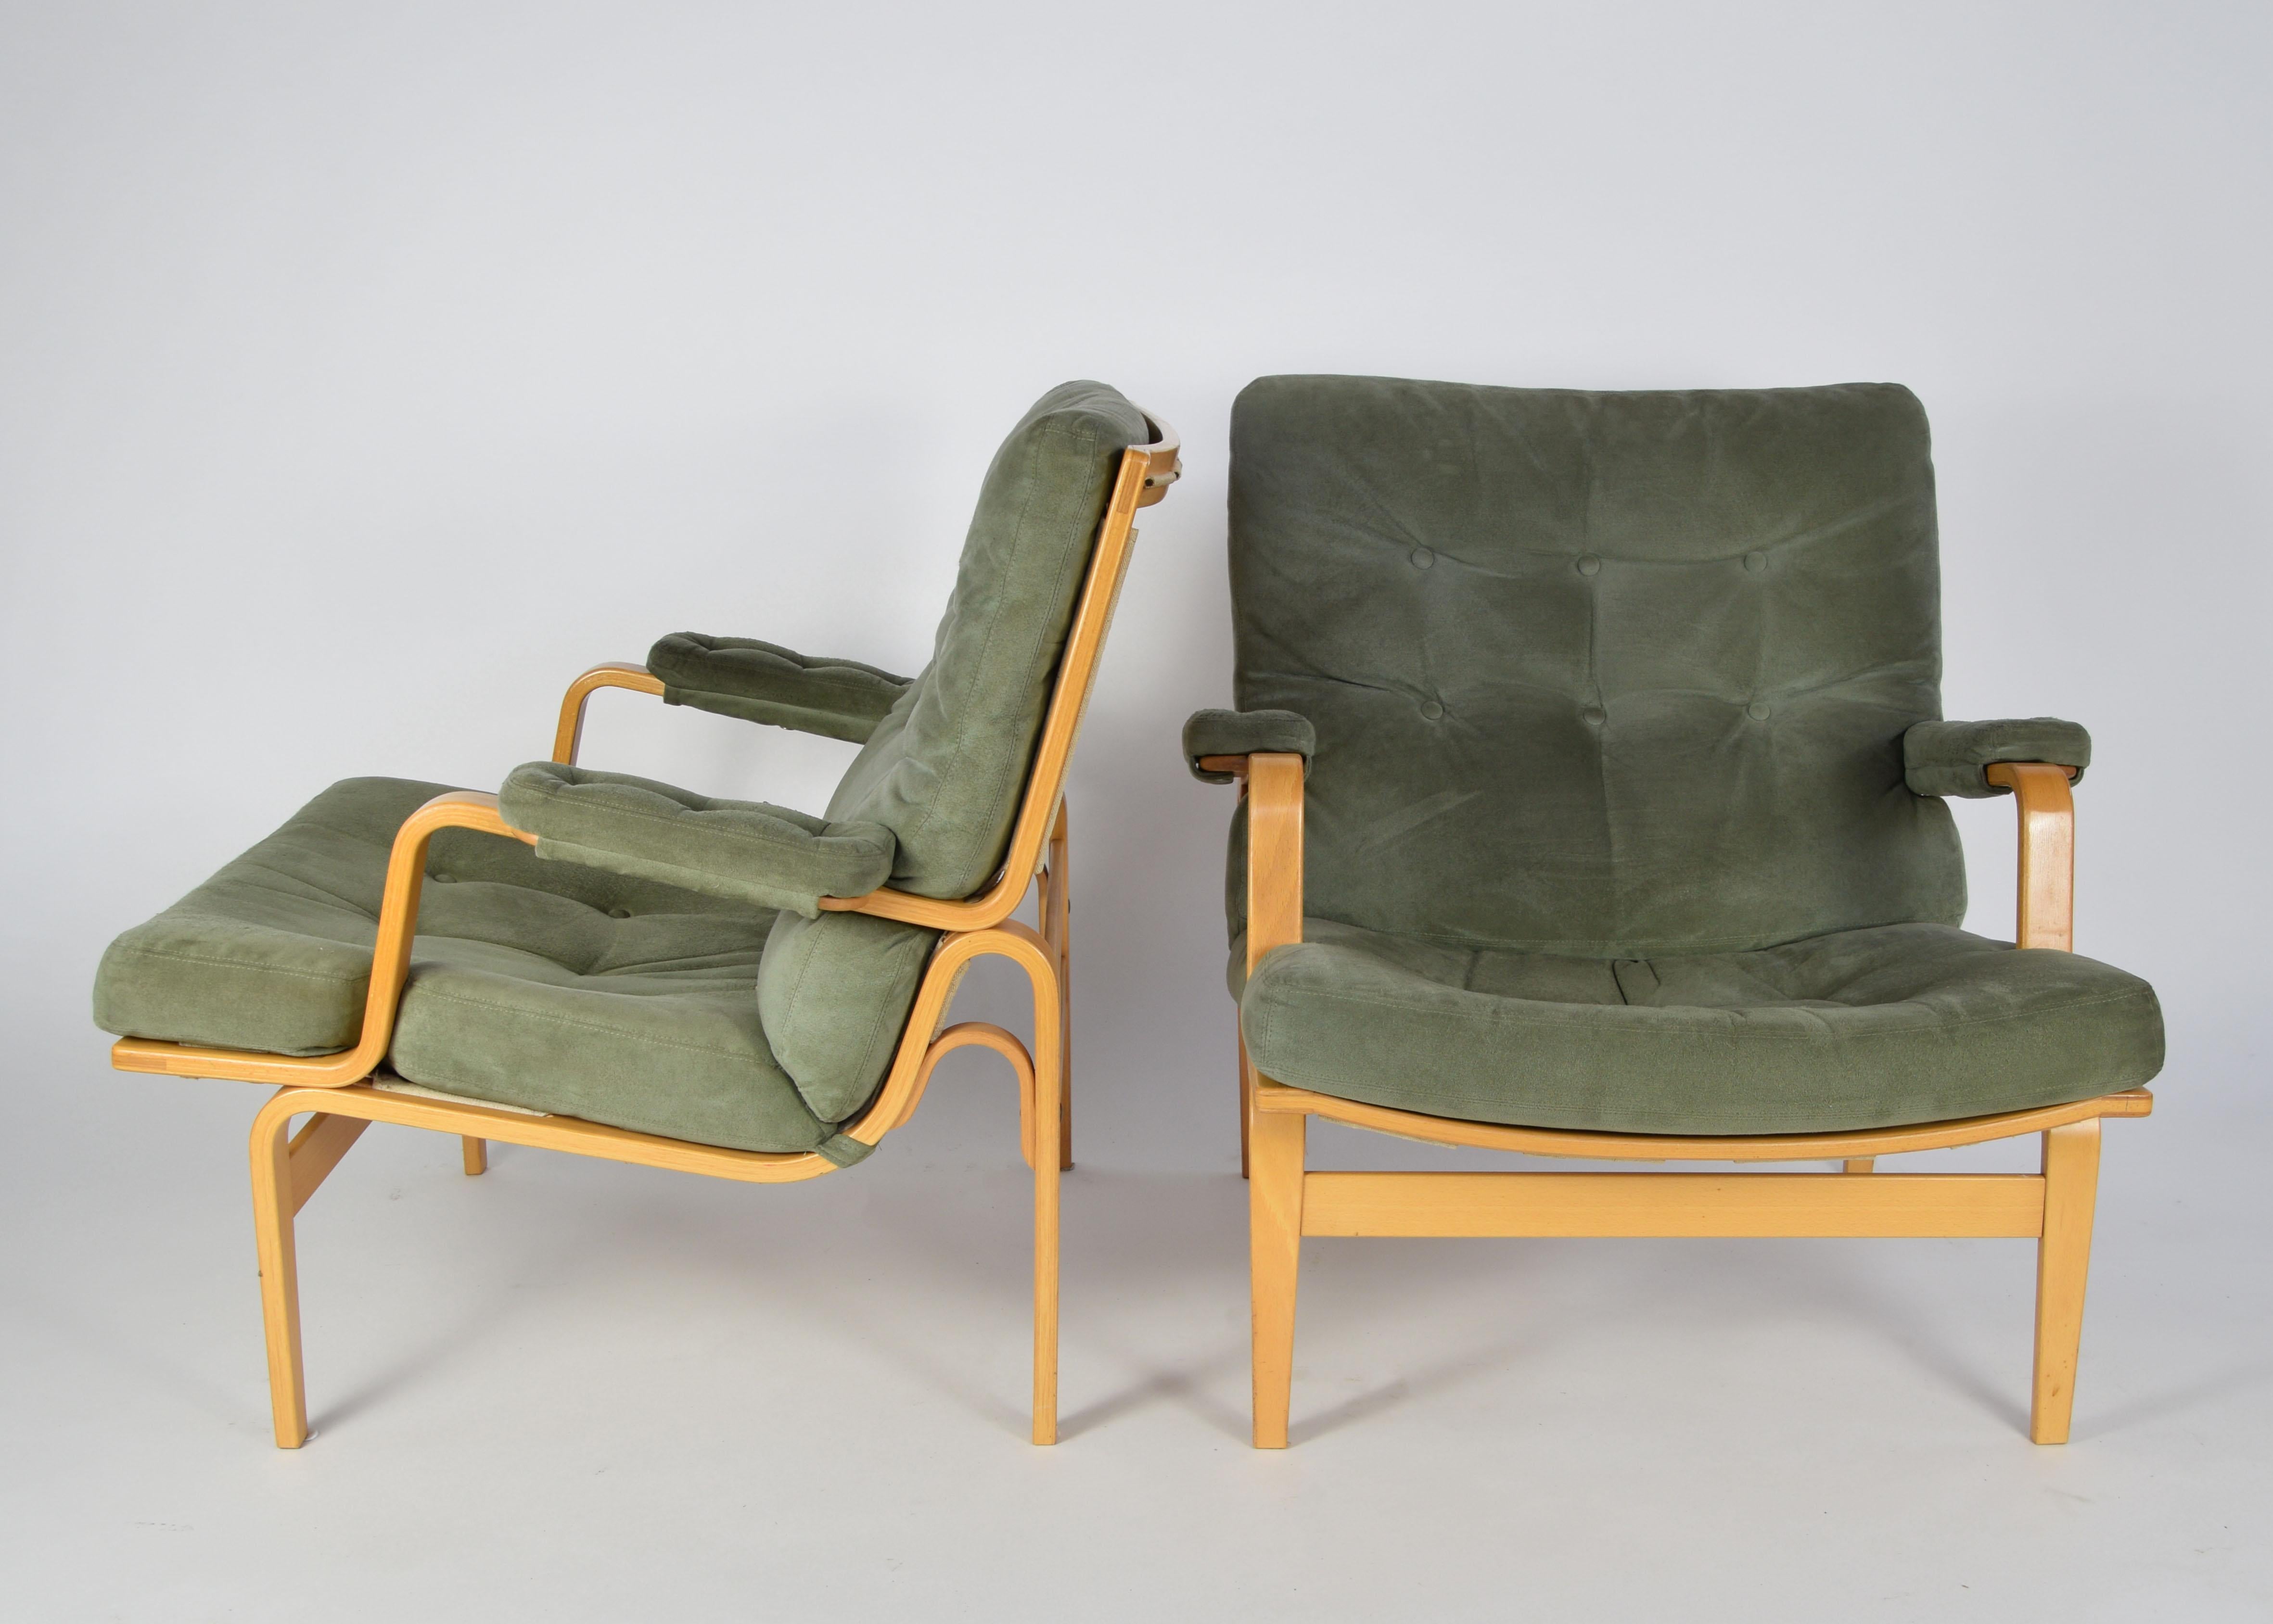 Wonderful pair of two lounge chairs Ingrid, designed by Bruno Mathsson for DUX in the 1970s.

Based in molded birch with original alcantara upholstery in dusty-grey-green.

Bruno Mathsson (1907–1988) was a Swedish furniture designer and architect